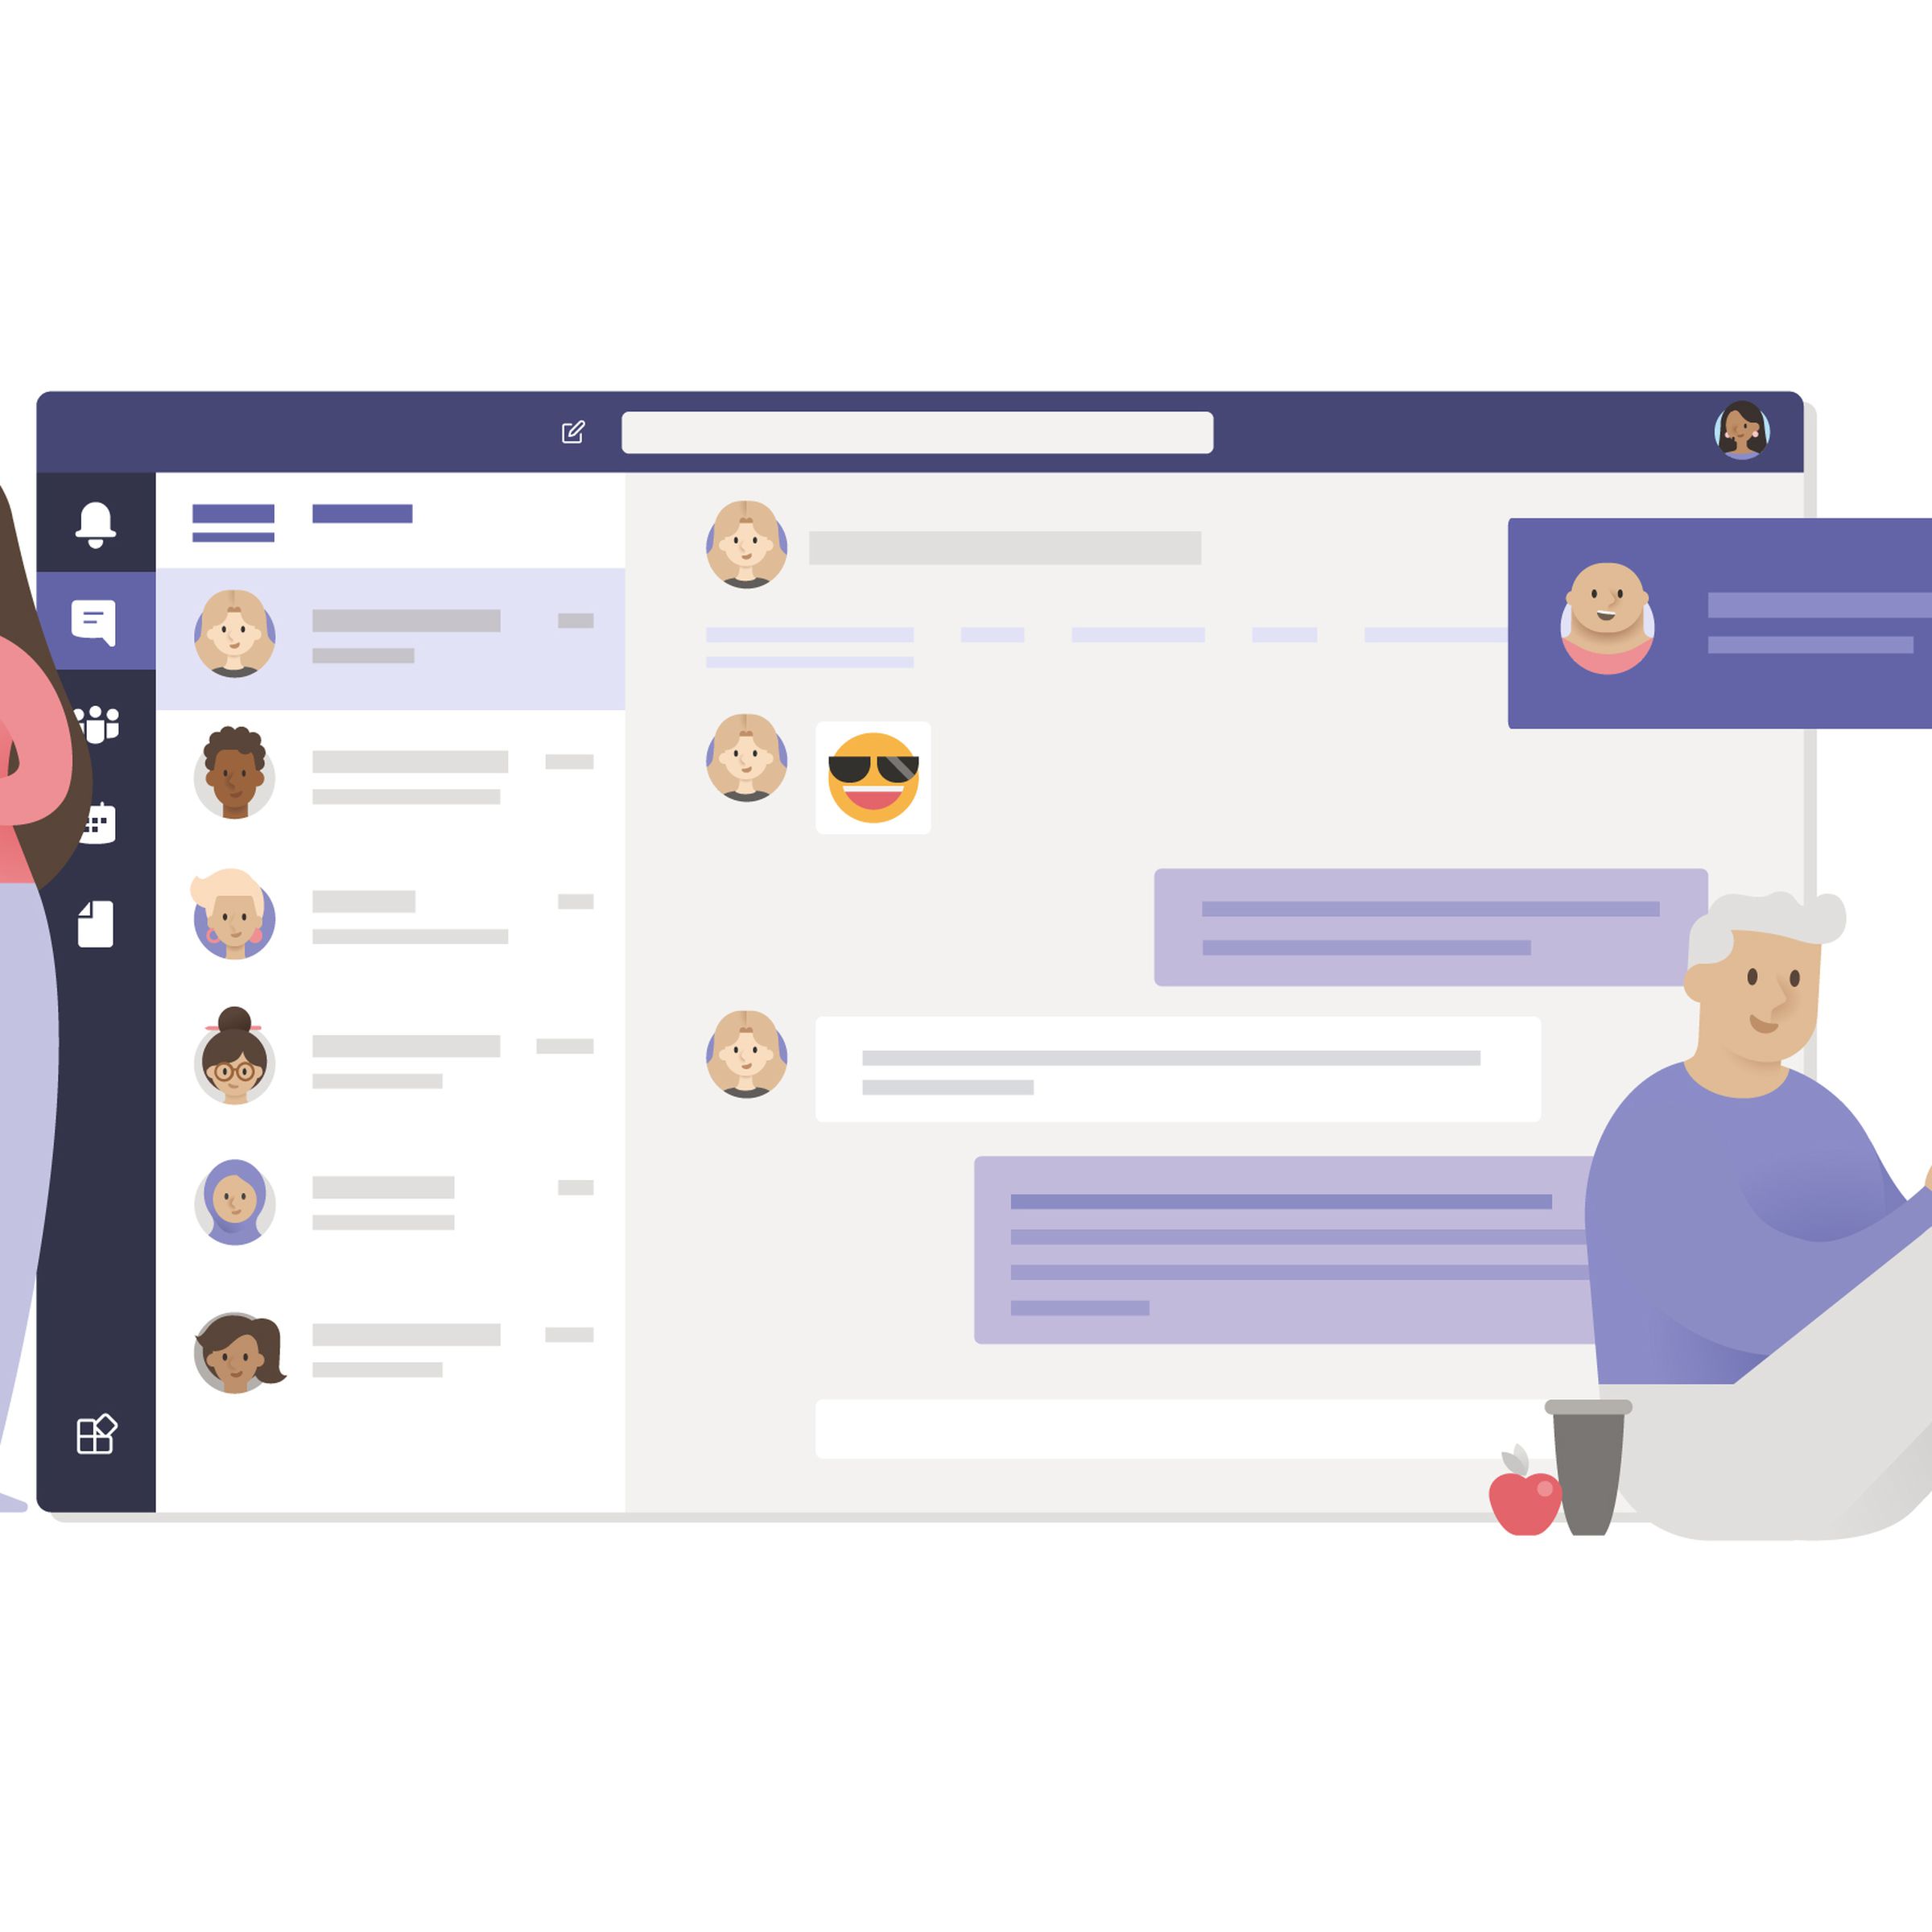 Microsoft Teams chat communication is coming to Outlook